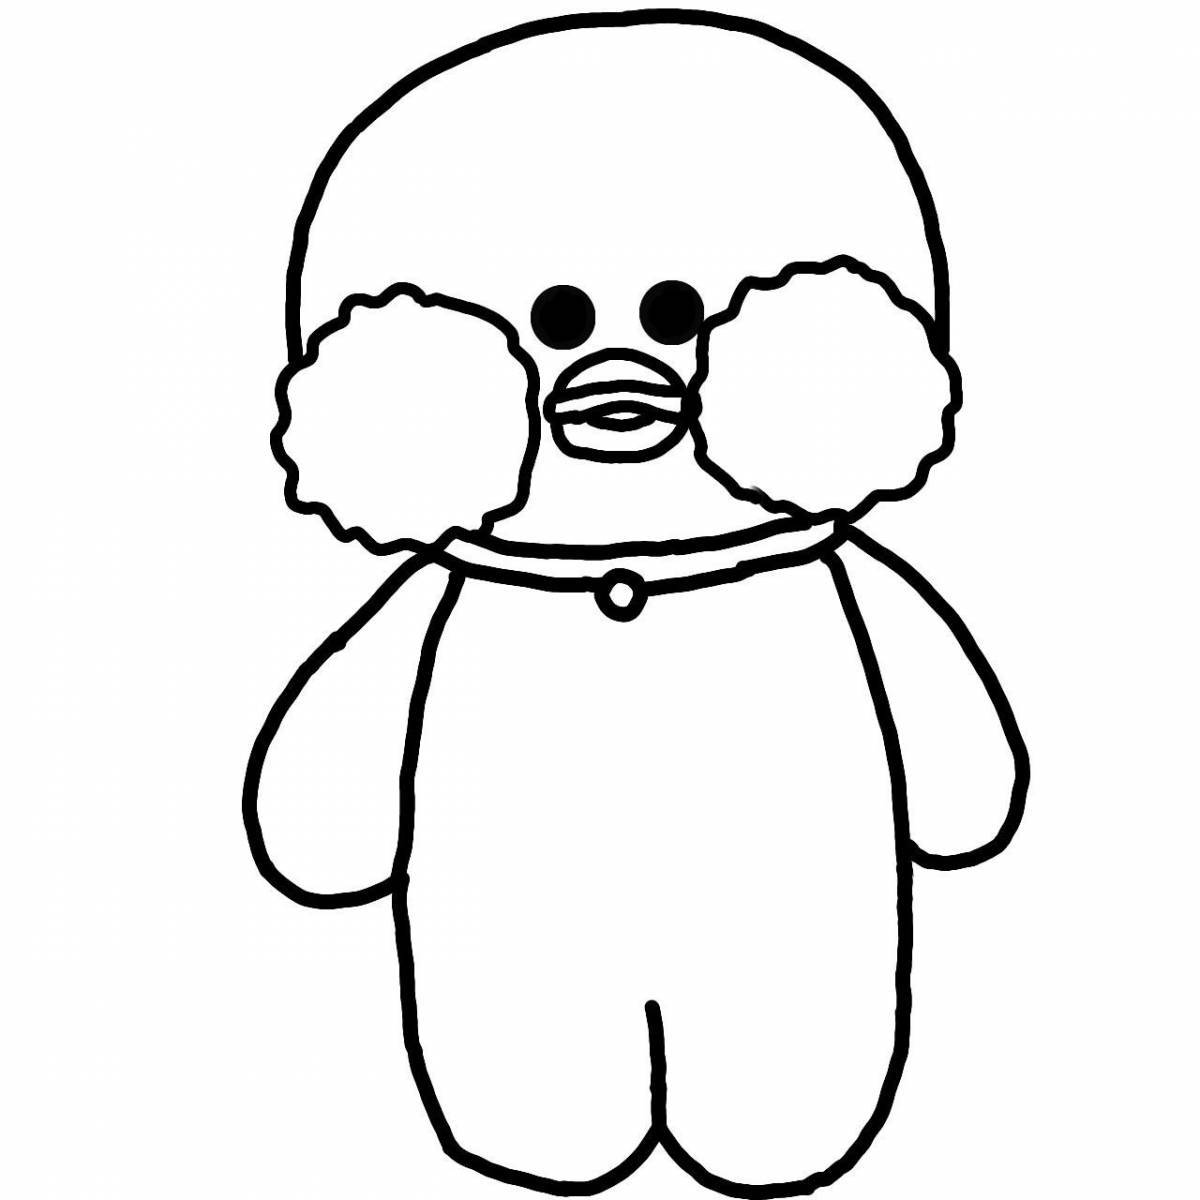 Color-mania duck lalafanfan coloring page